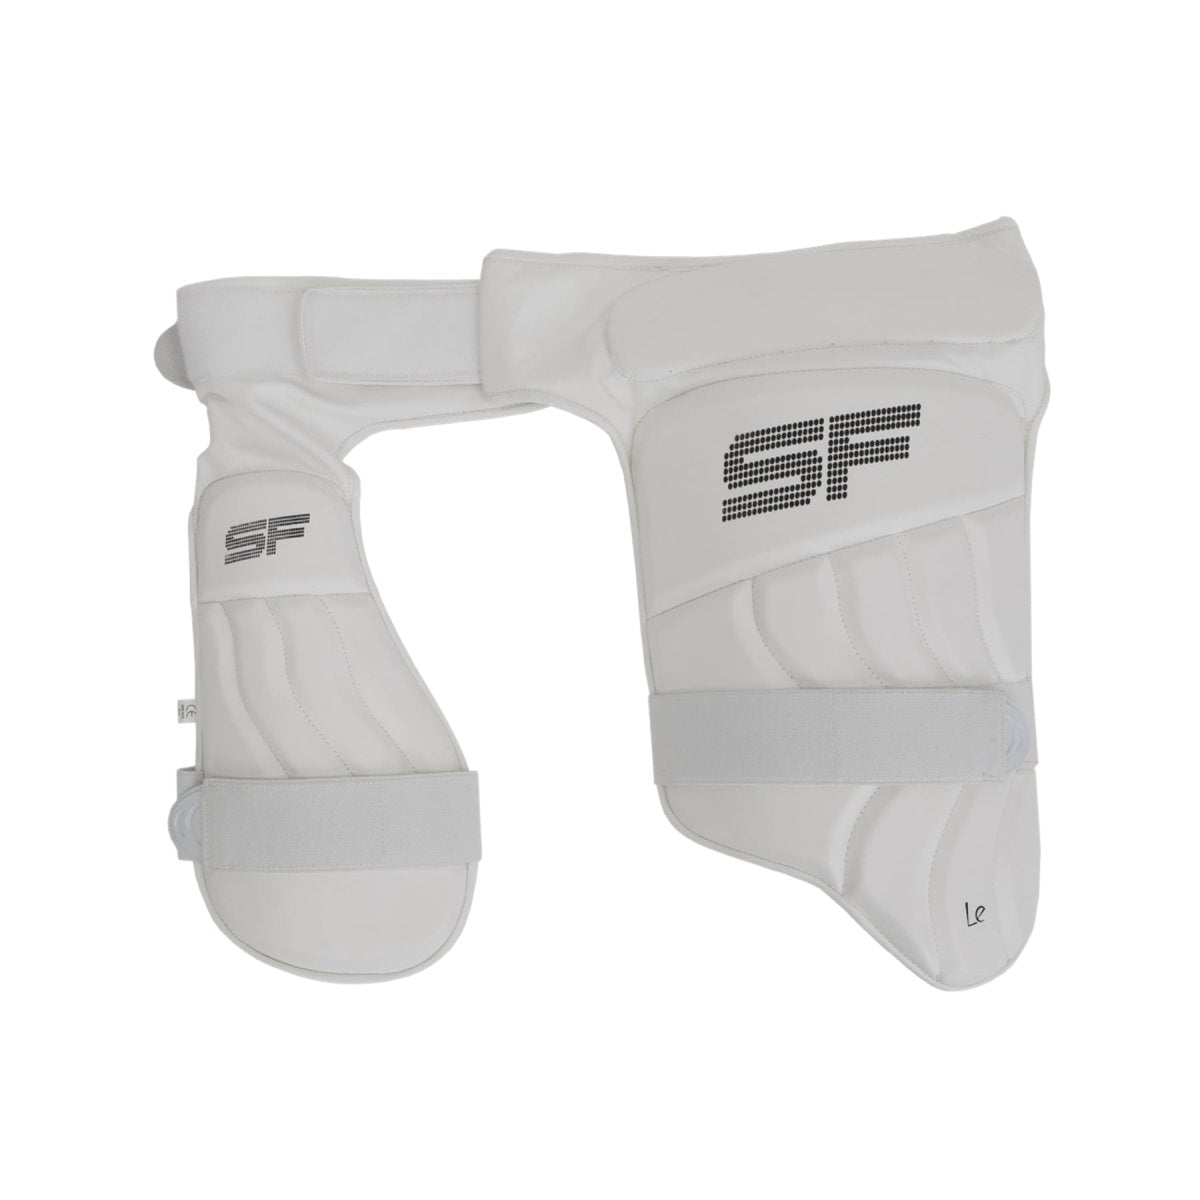 SF Limited Edition Cricket Thigh Guard